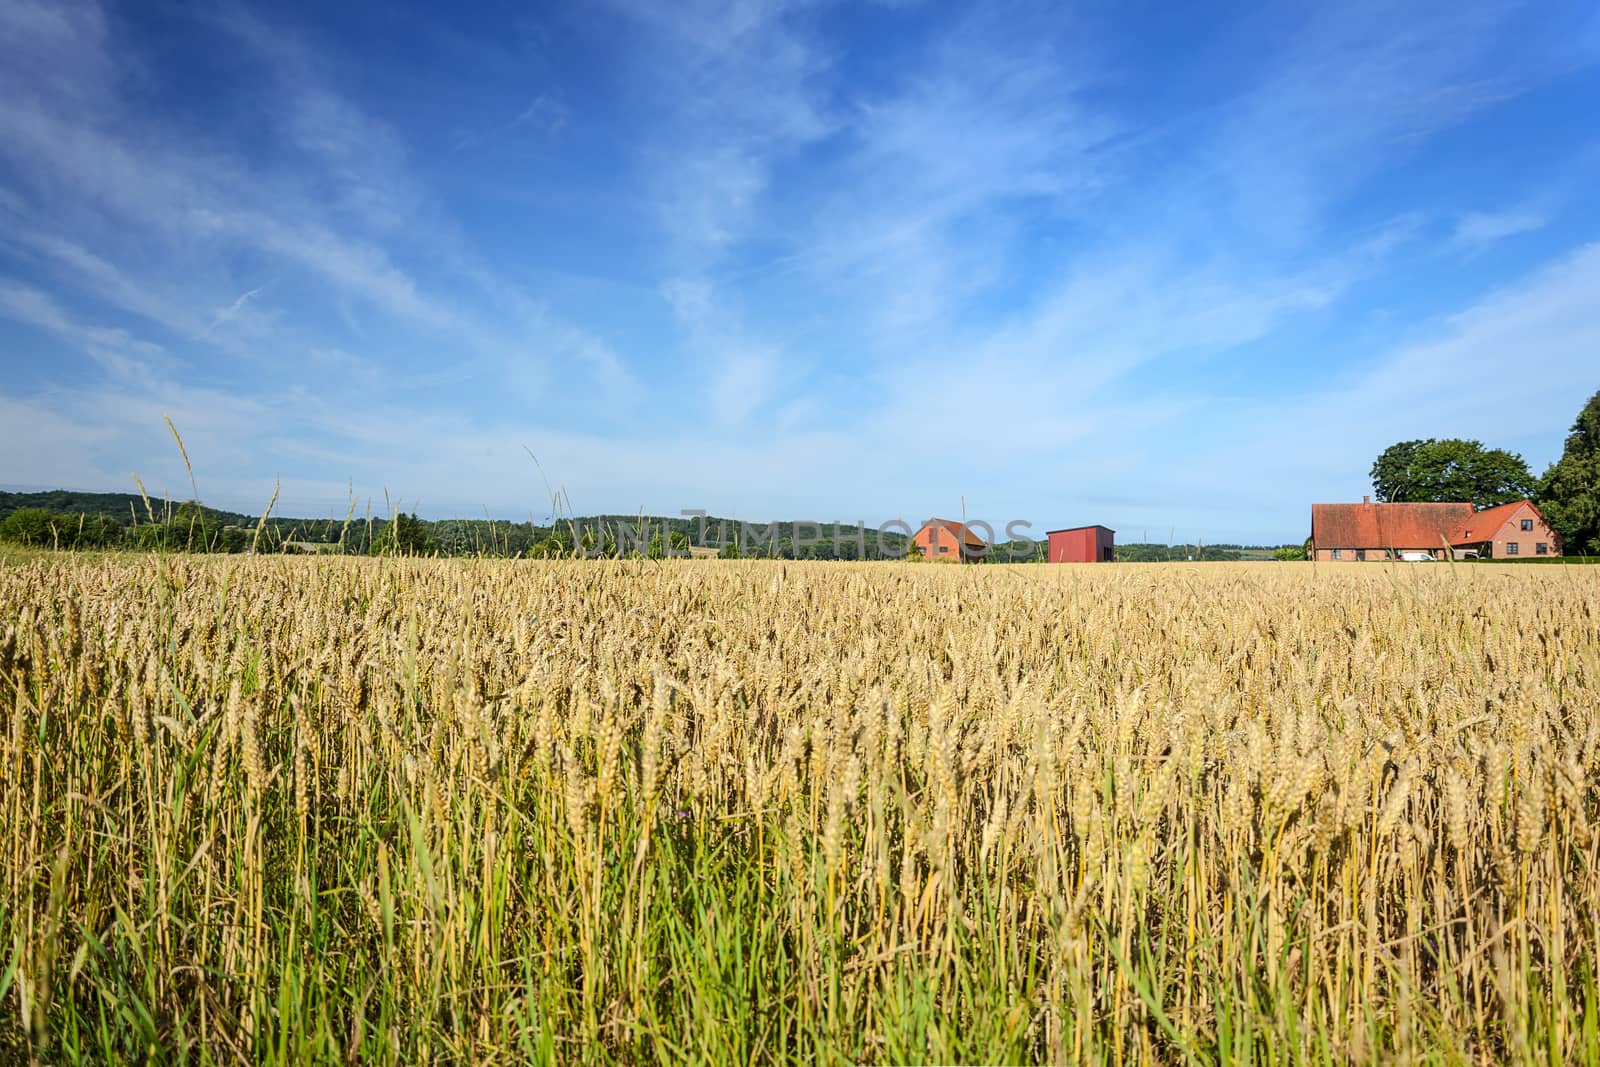 Idyllic landscape of agricultural fields of grain with farm buildings on a background of blue sky and clouds.